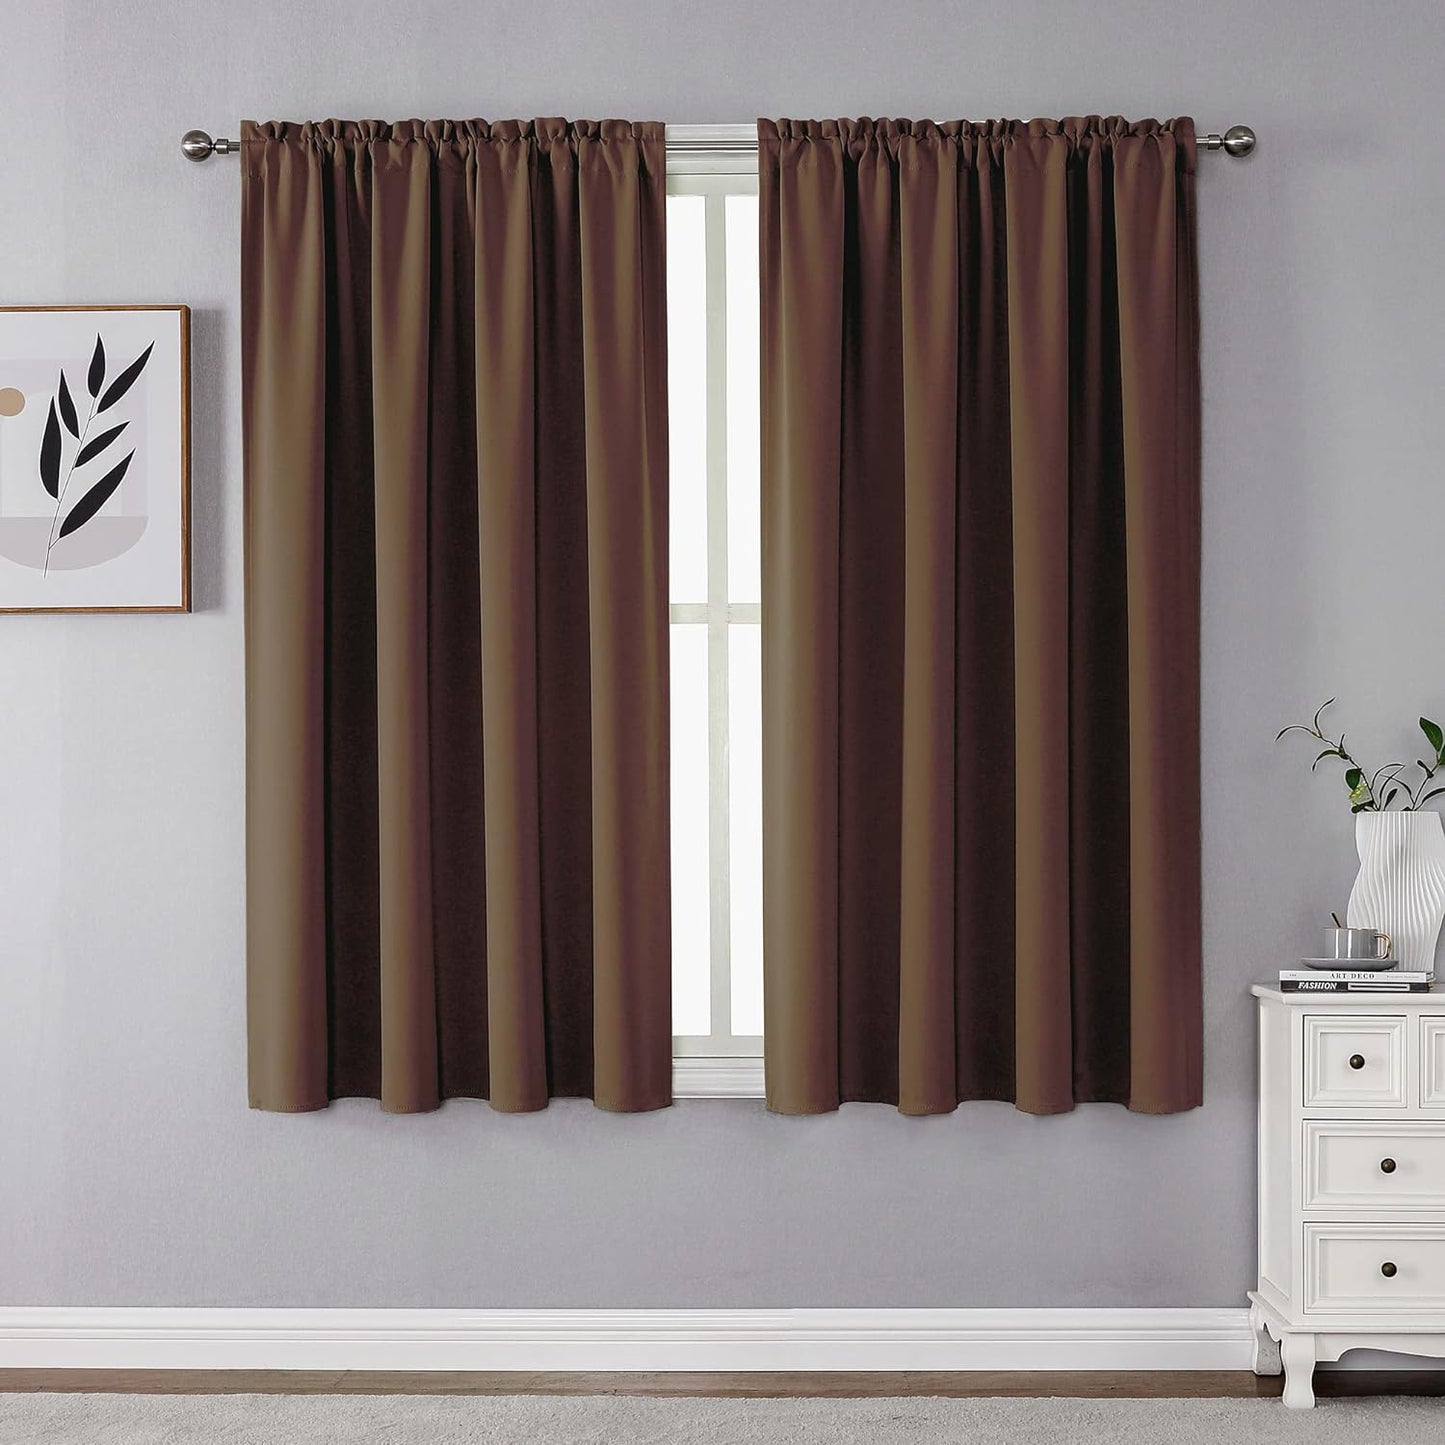 CUCRAF Blackout Curtains 84 Inches Long for Living Room, Light Beige Room Darkening Window Curtain Panels, Rod Pocket Thermal Insulated Solid Drapes for Bedroom, 52X84 Inch, Set of 2 Panels  CUCRAF Brown 52W X 54L Inch 2 Panels 